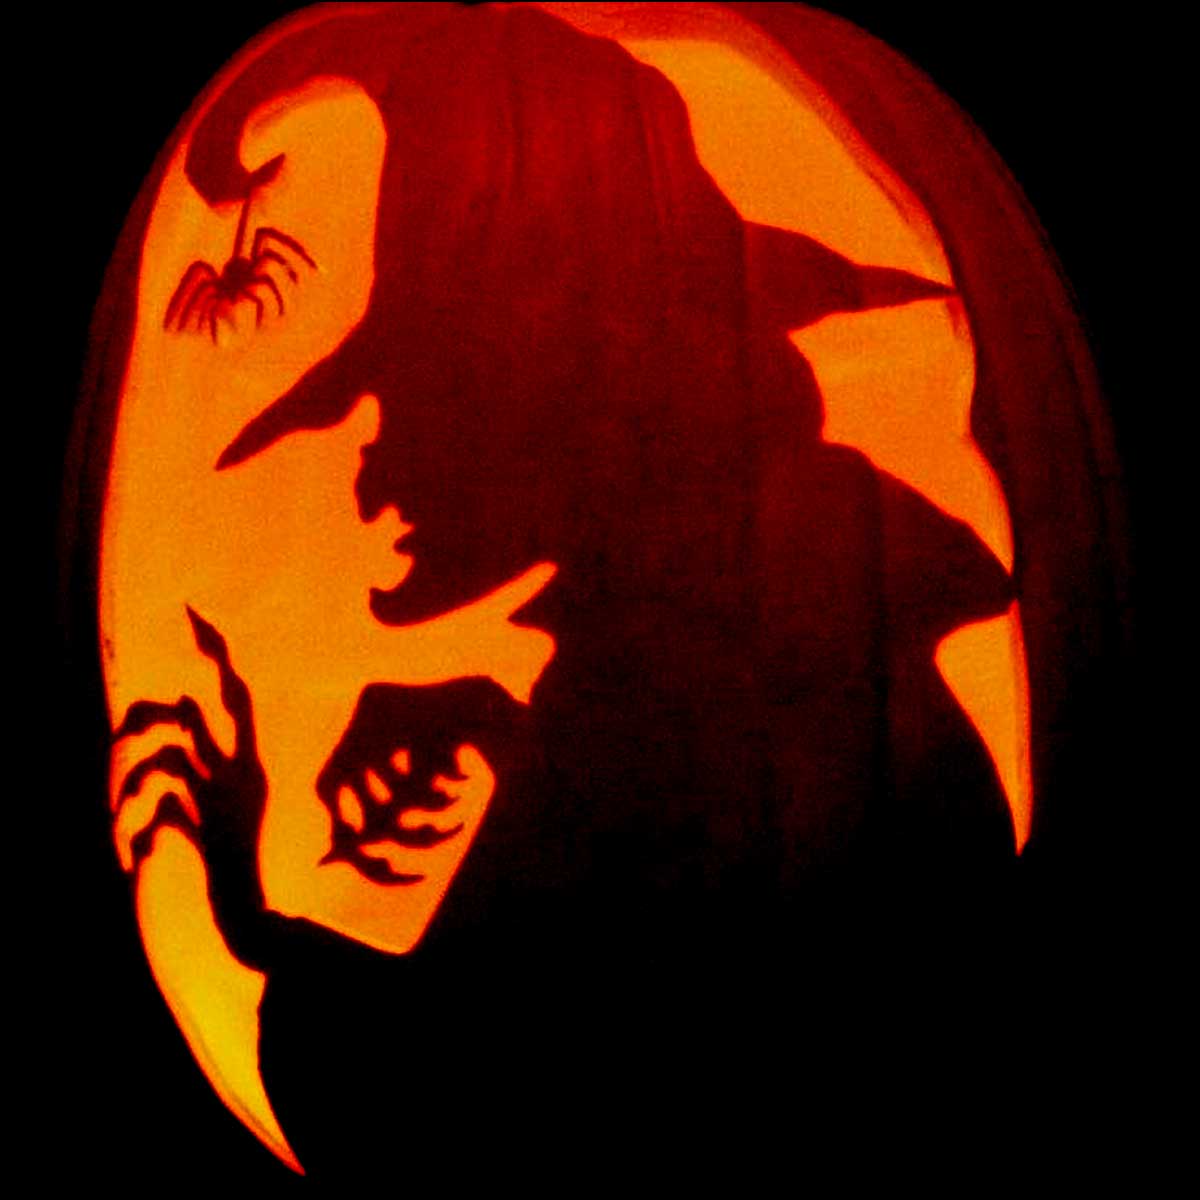 70+ Advanced Challenging Halloween Pumpkin Carving Ideas 2020 for ...